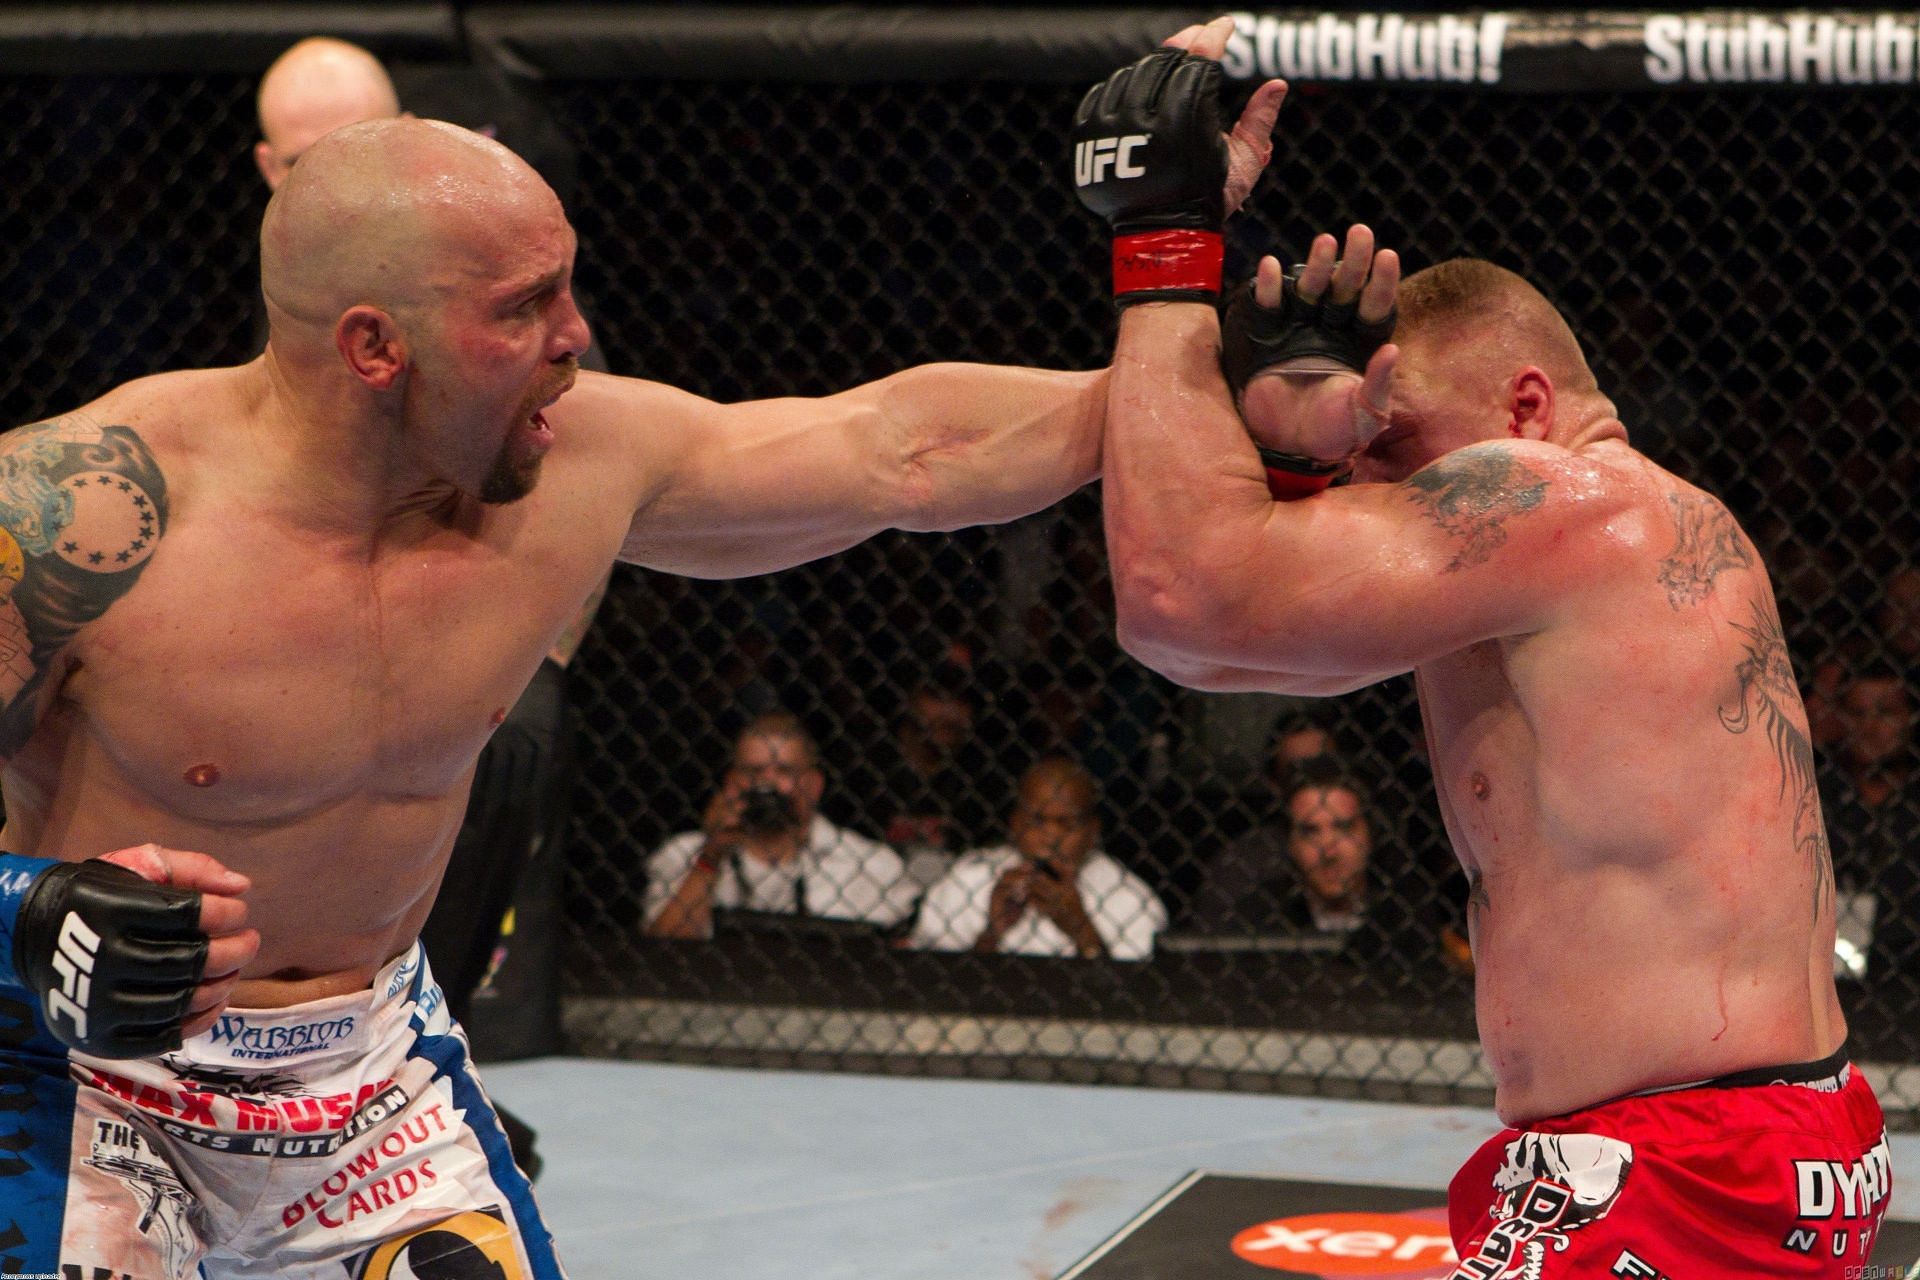 Shane Carwin blew his gas tank attempting to finish Brock Lesnar early - leaving him a sitting duck as the fight went on